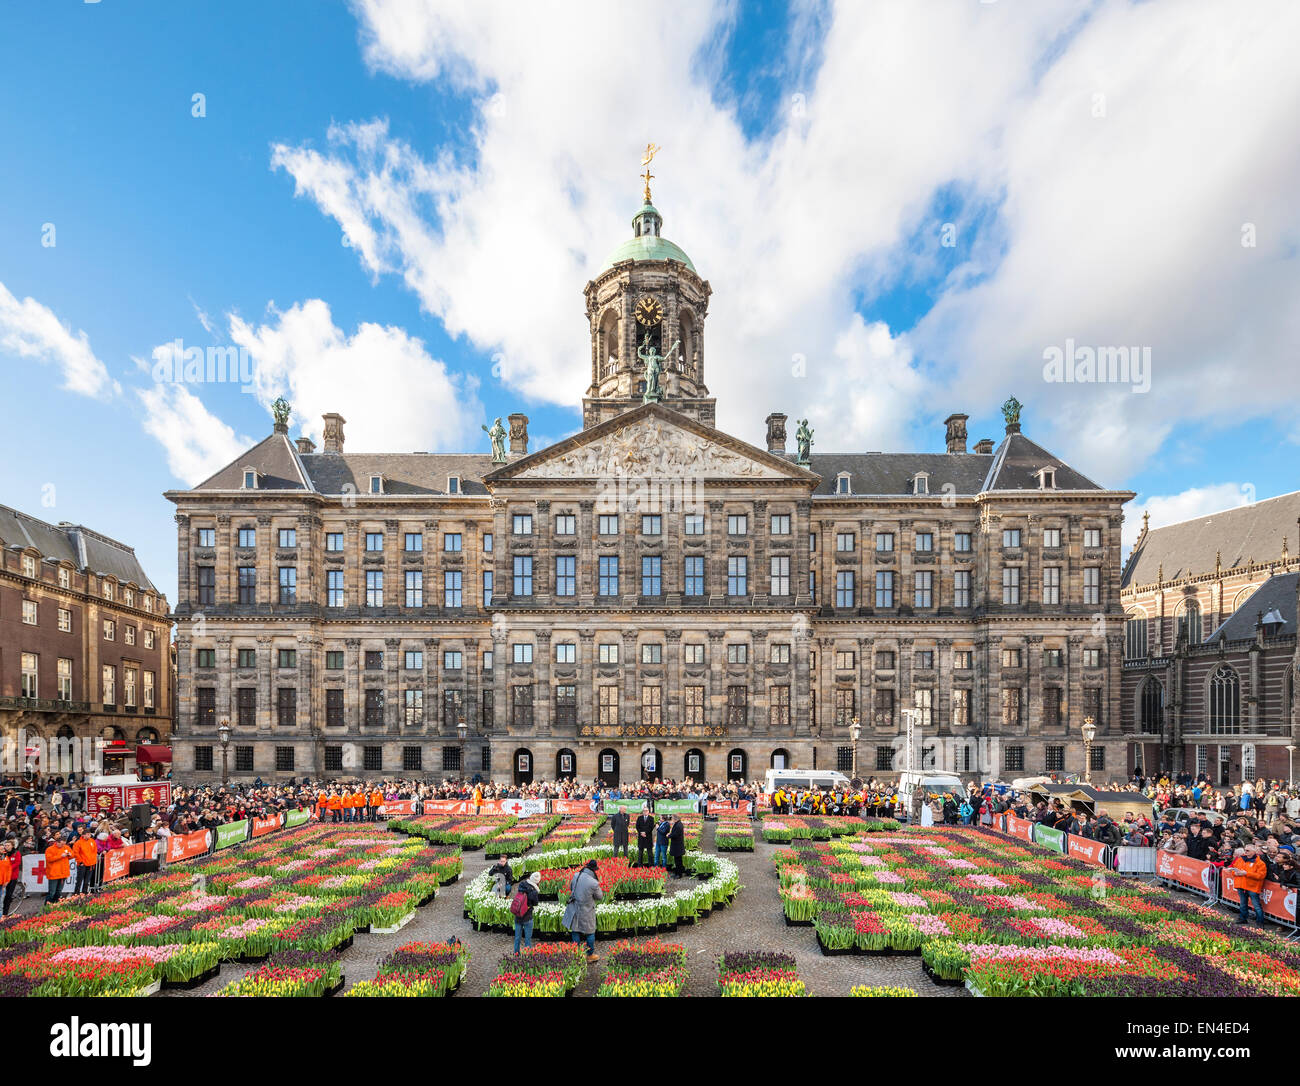 10.000 visitors will pick 200.000 tulips on Amsterdam Dam Square for free. National Tulip Day starting official Tulip Season Stock Photo